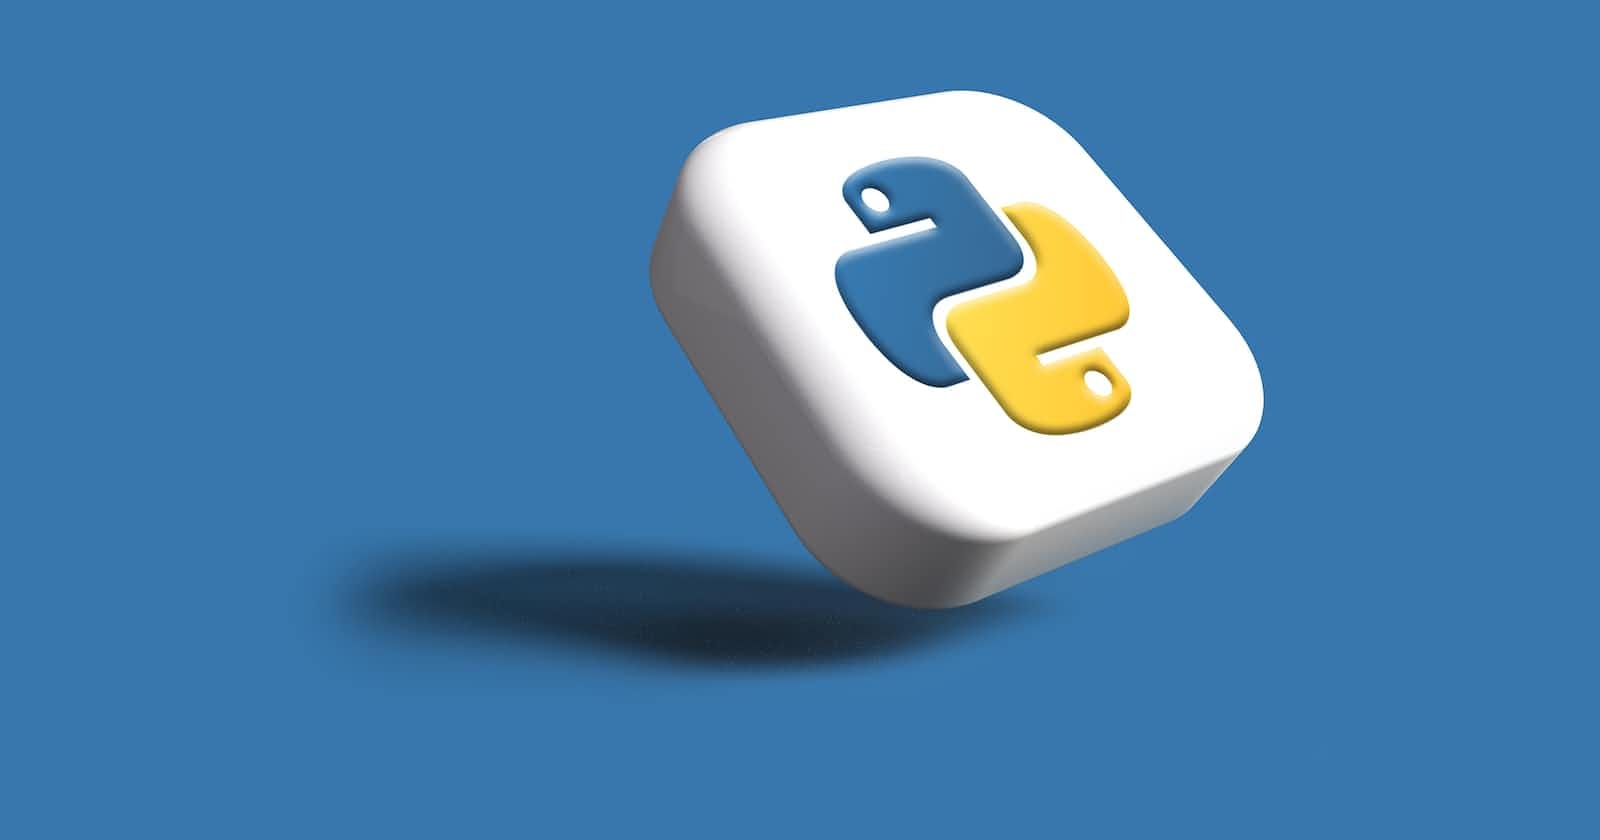 Top 5 most useful Python libraries